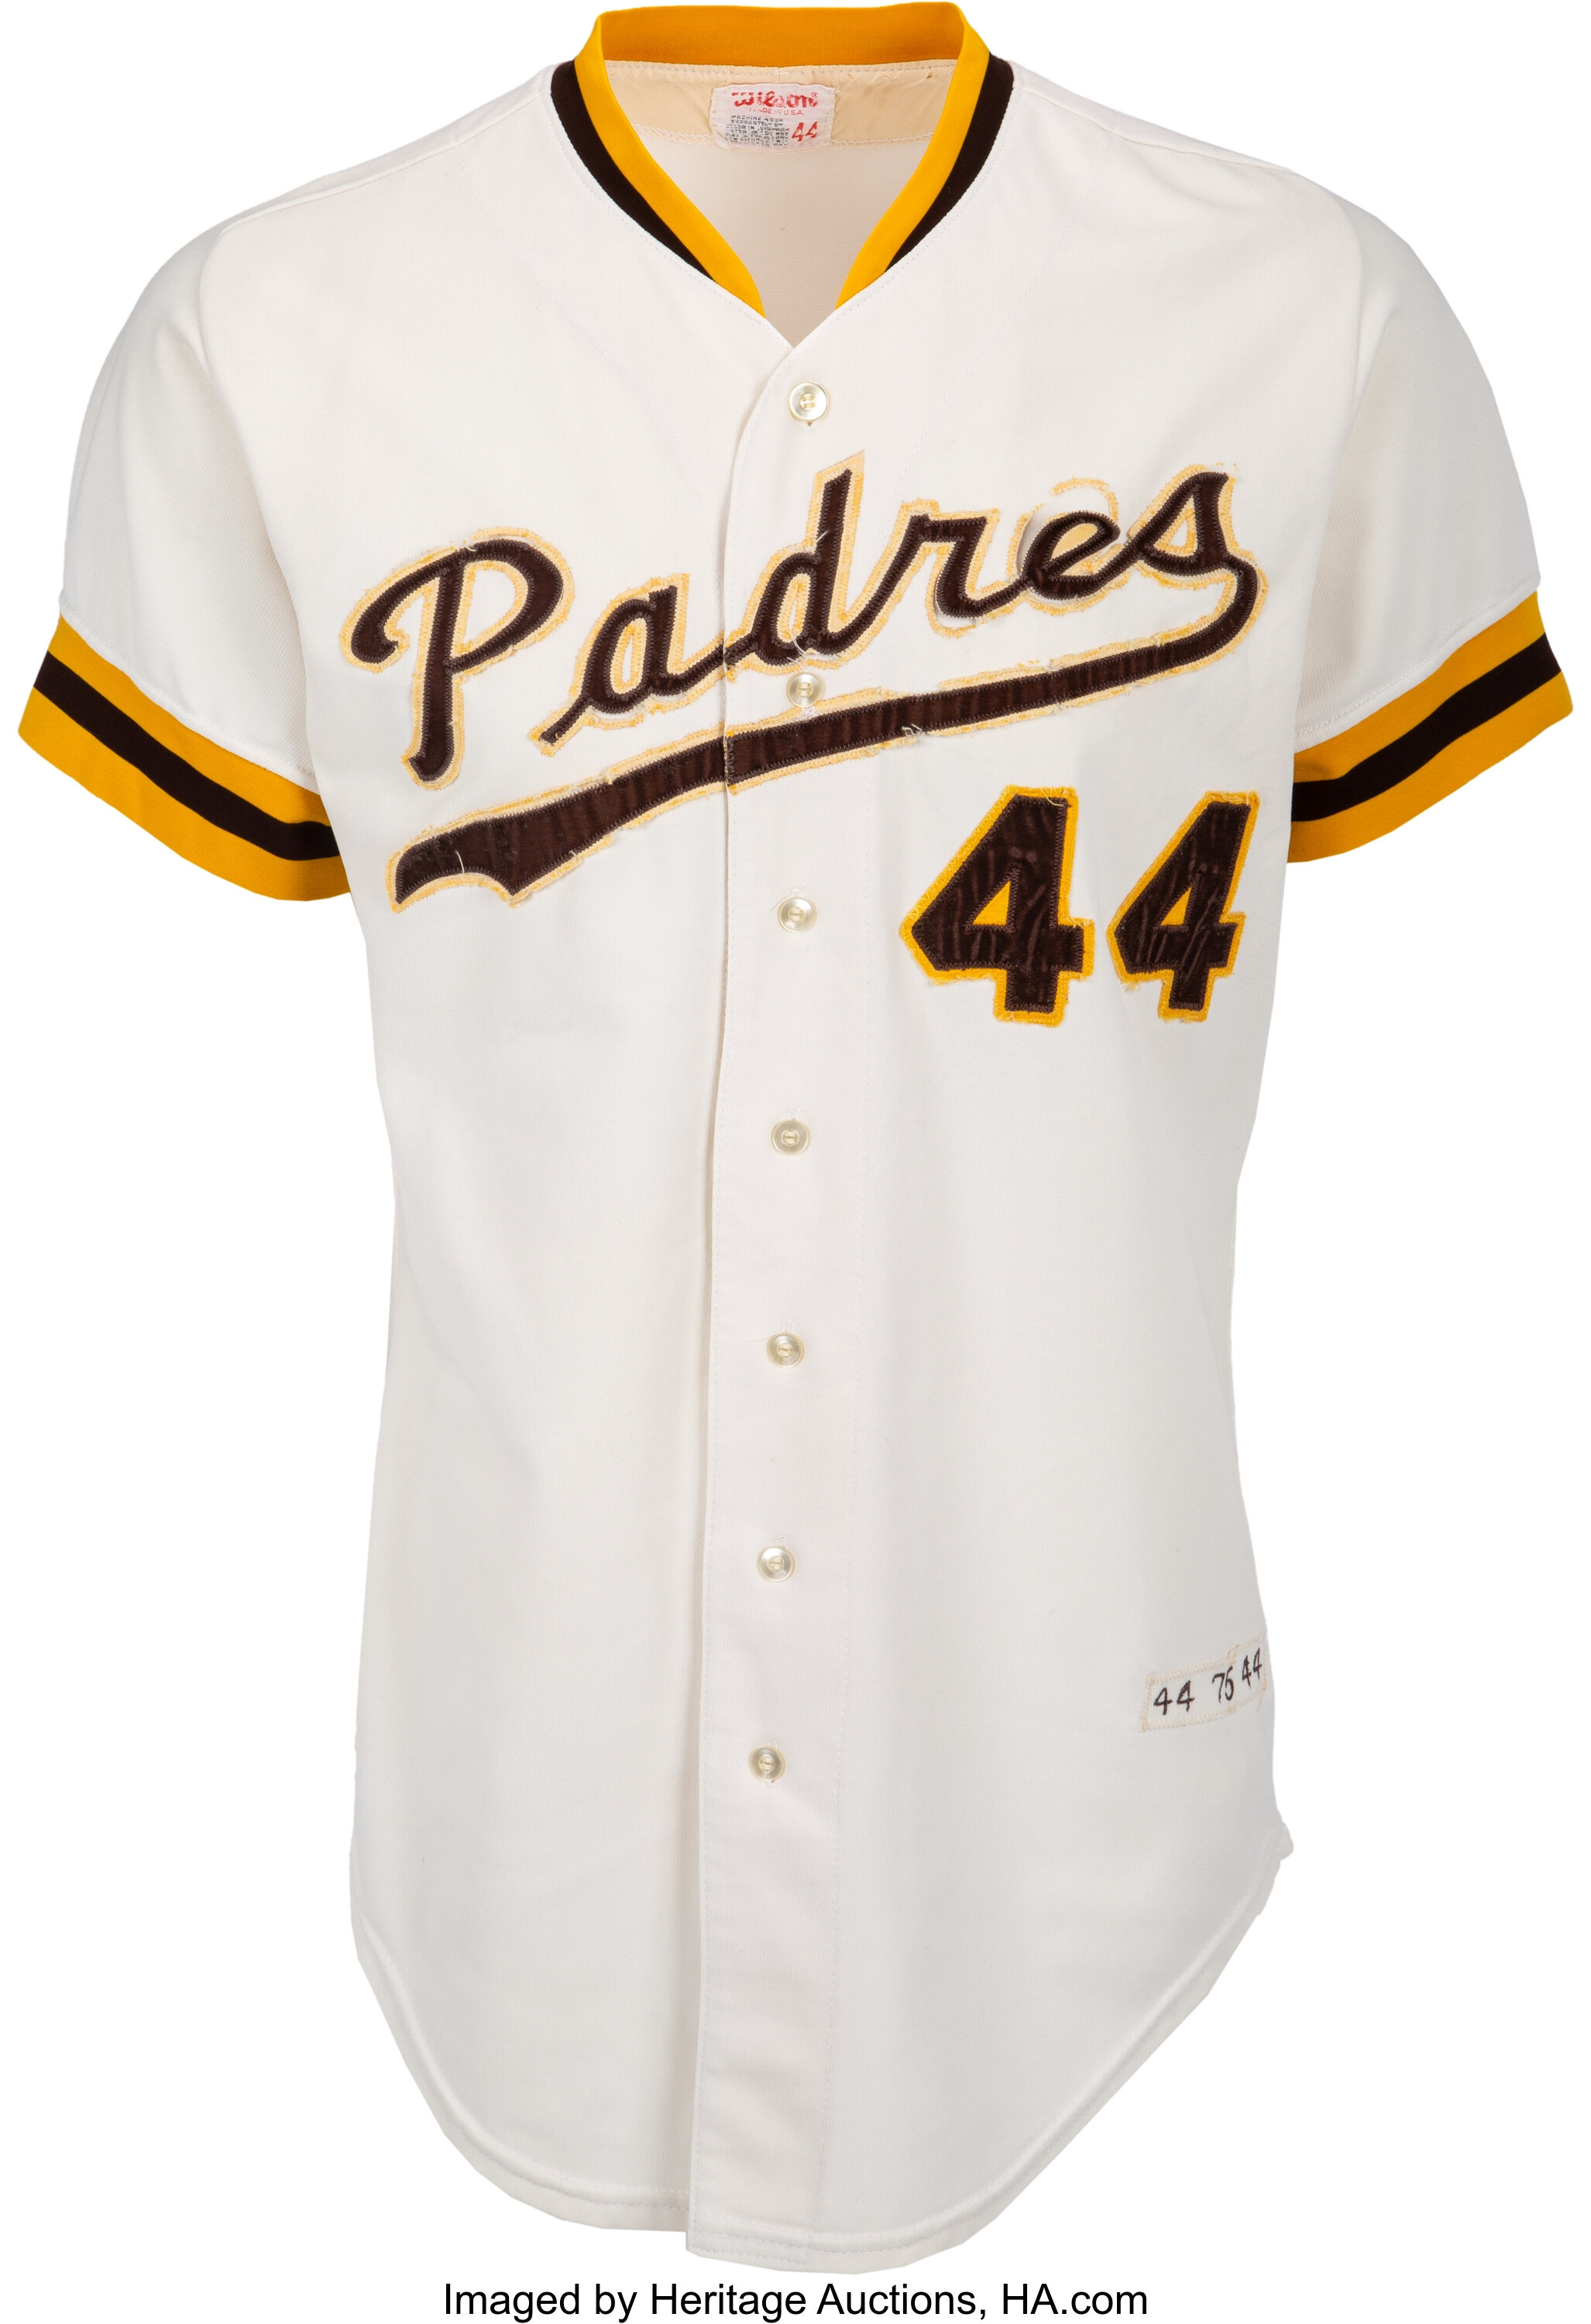 1980-88 Game Worn San Diego Padres Jerseys Lot of 3. (Total: 3, Lot  #57959